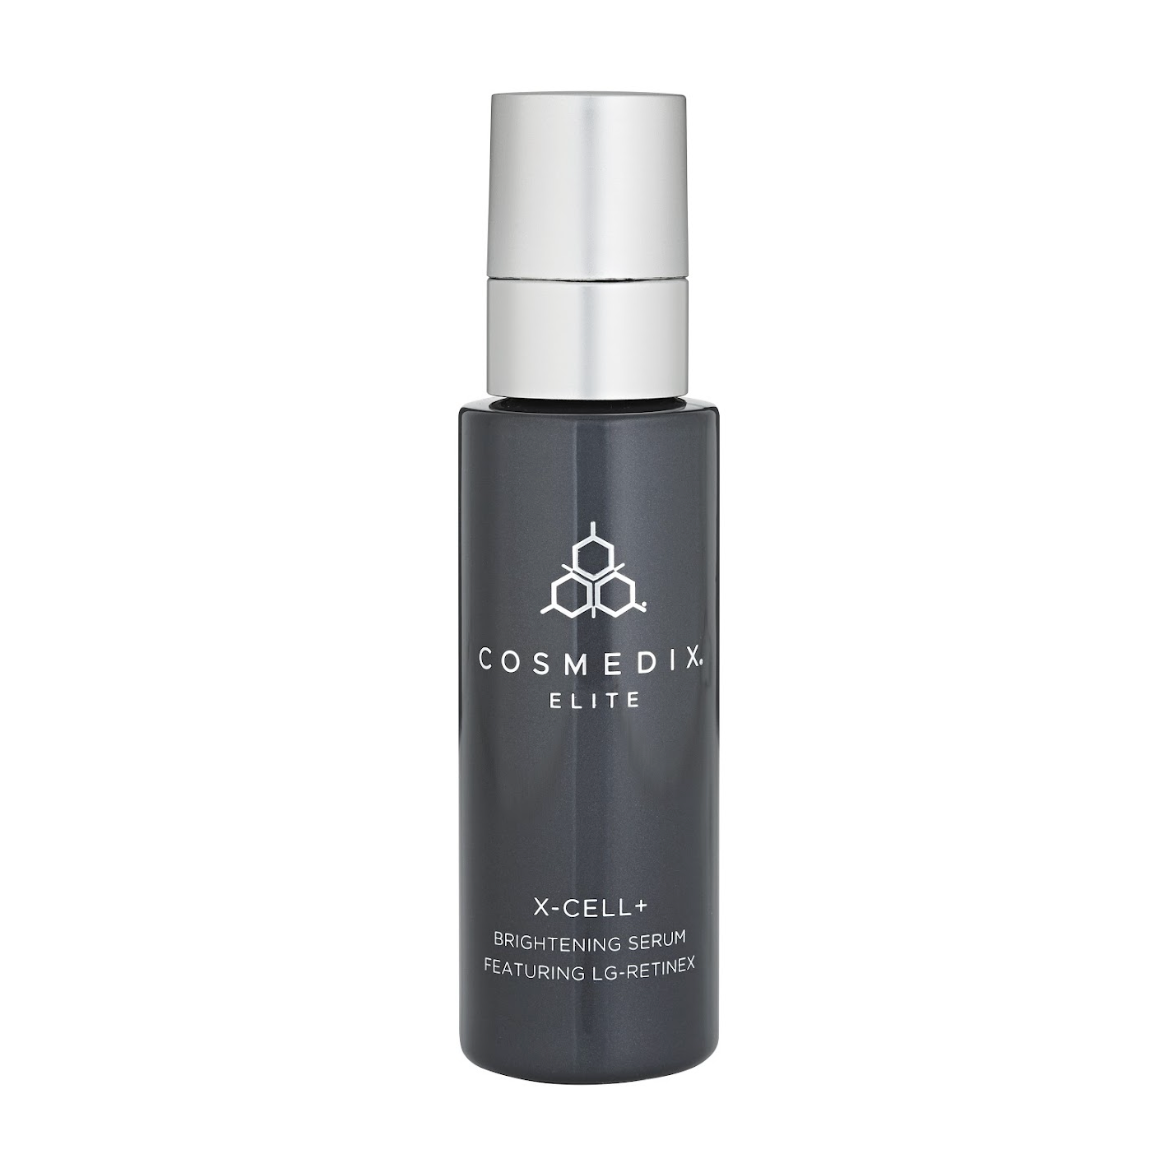 X-CELL+ 30ML $129